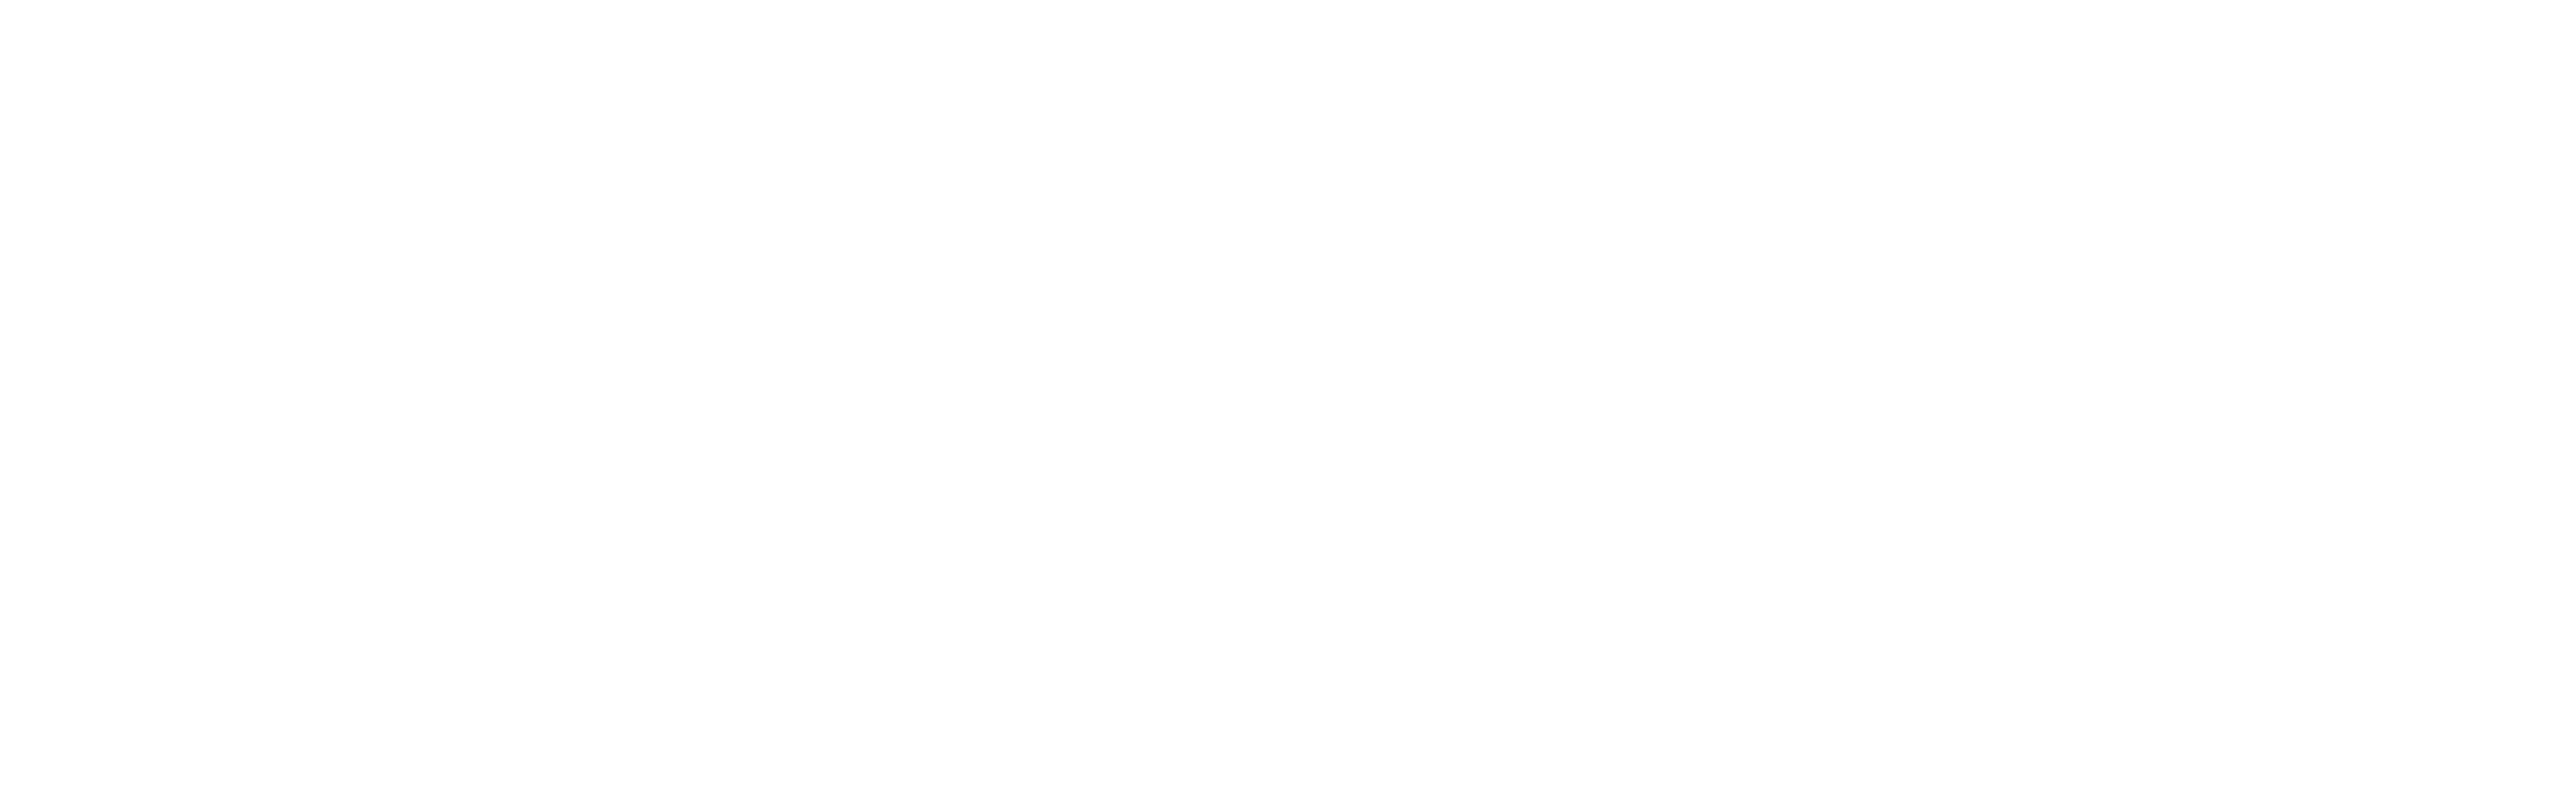 KENNEDY SEWING and CUTTING SUPPLY - HOME PAGE